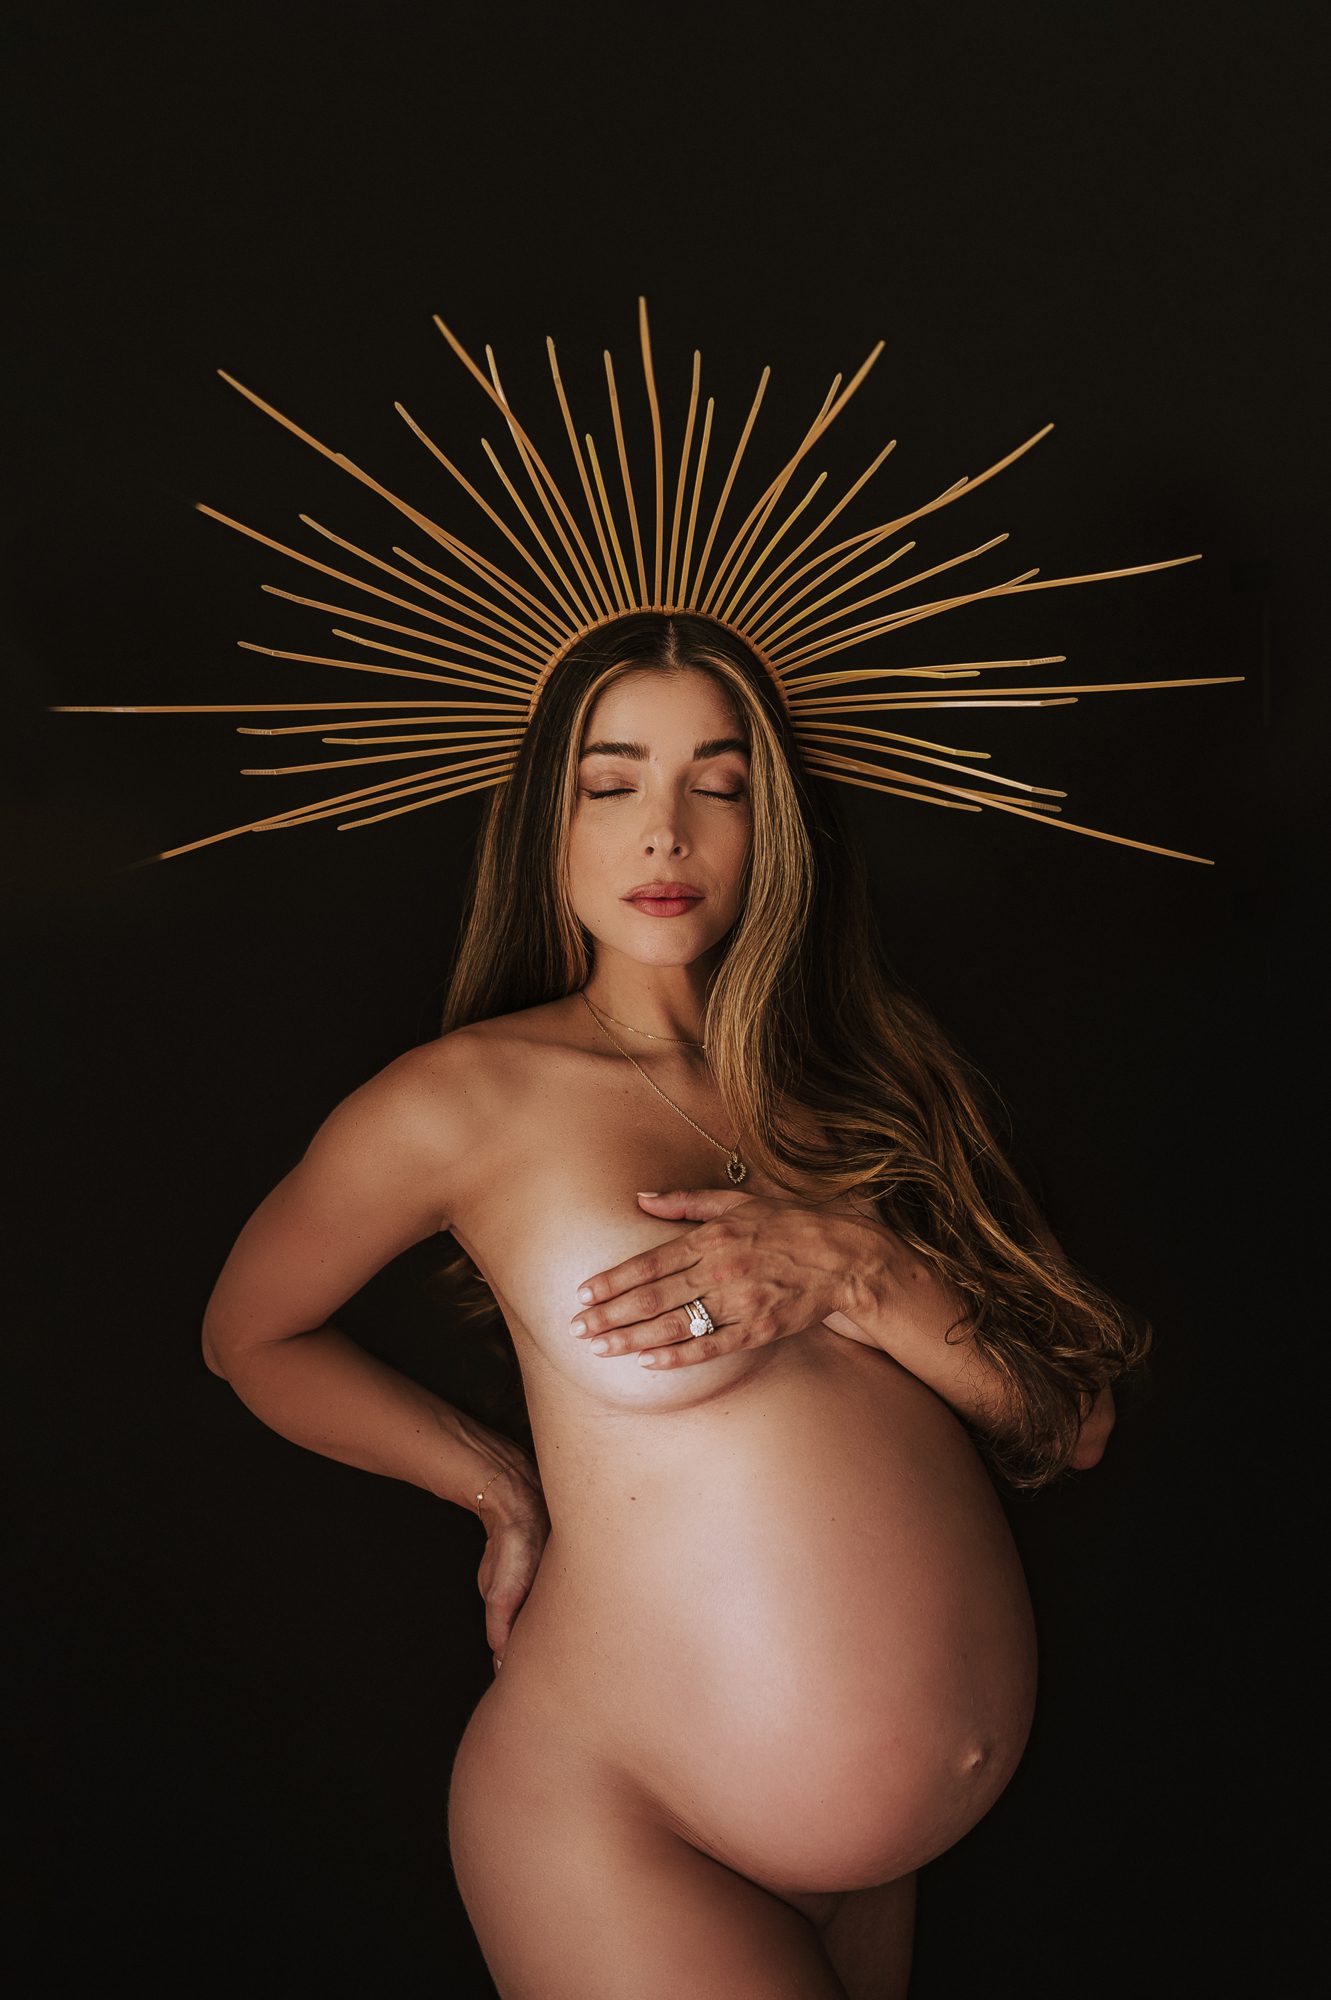 beautiful mother to be poses with golden grown on her head in this maternity portrait